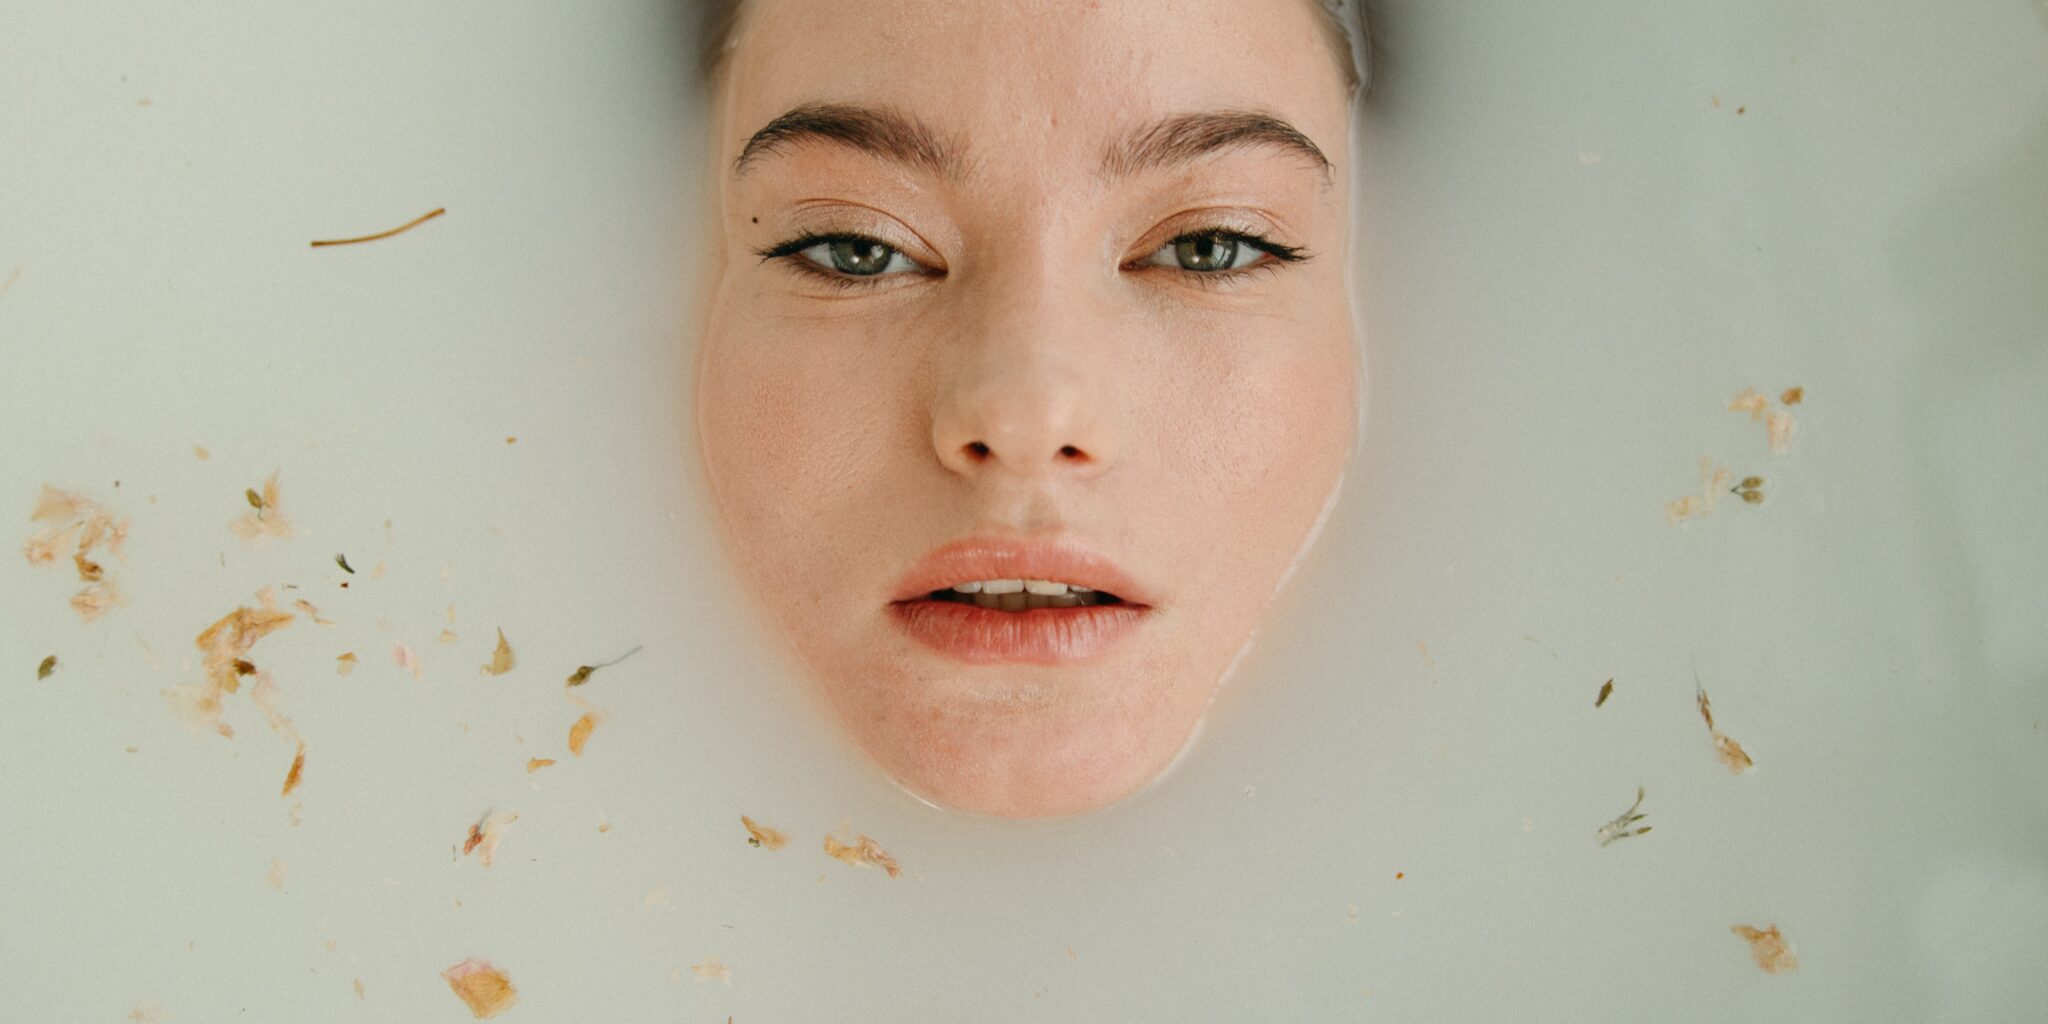 Woman immersed in a bath tub as an introduction image for a blog post about sensory branding